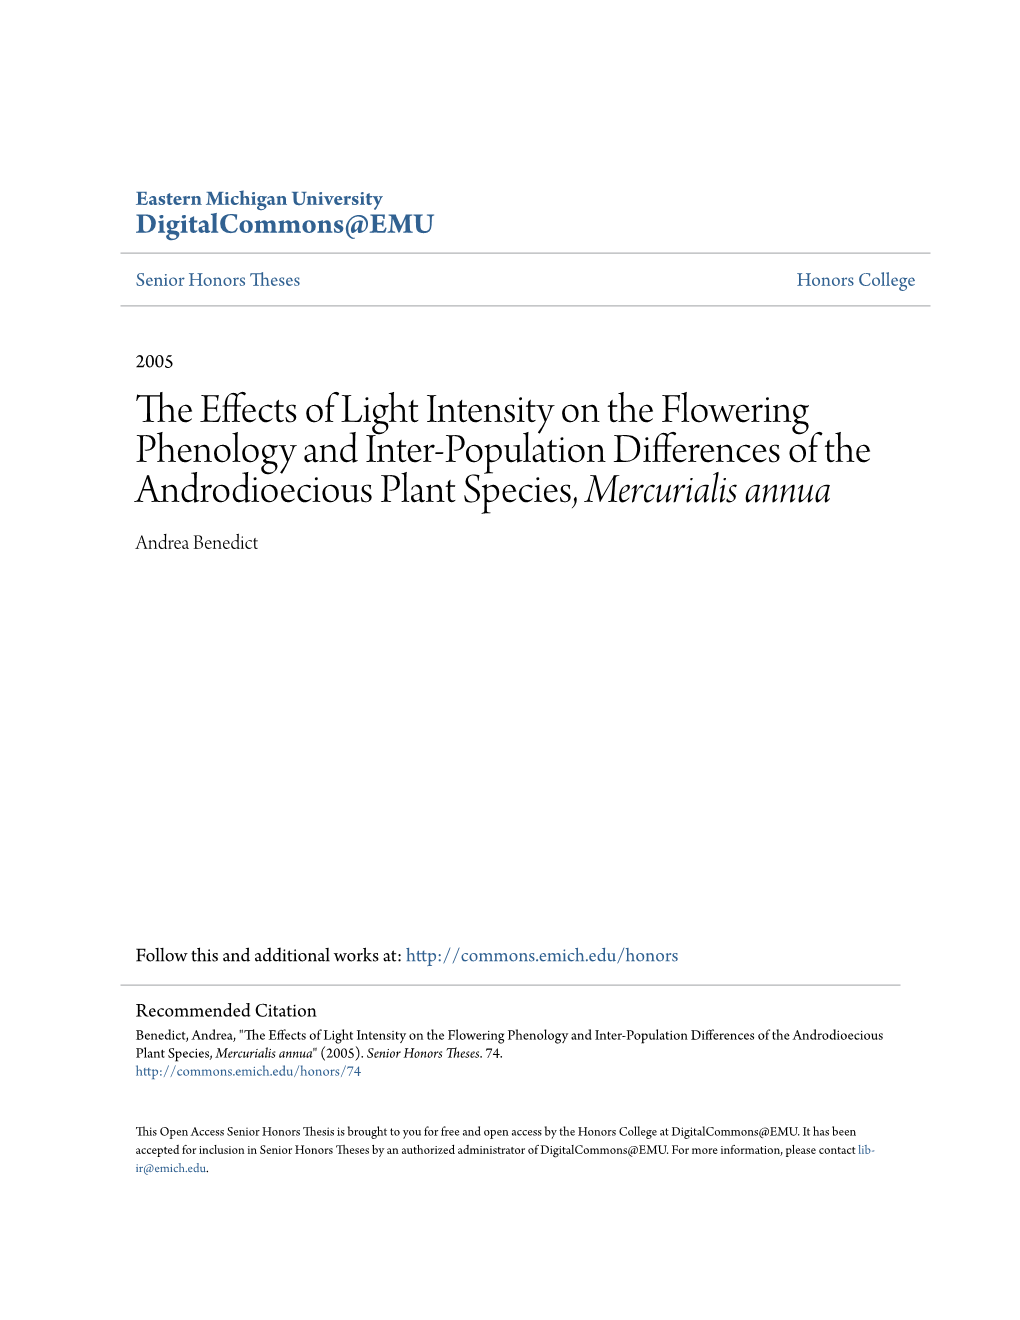 The Effects of Light Intensity on the Flowering Phenology and Inter-Population Differences of the Androdioecious Plant Species, Mercurialis Annua" (2005)